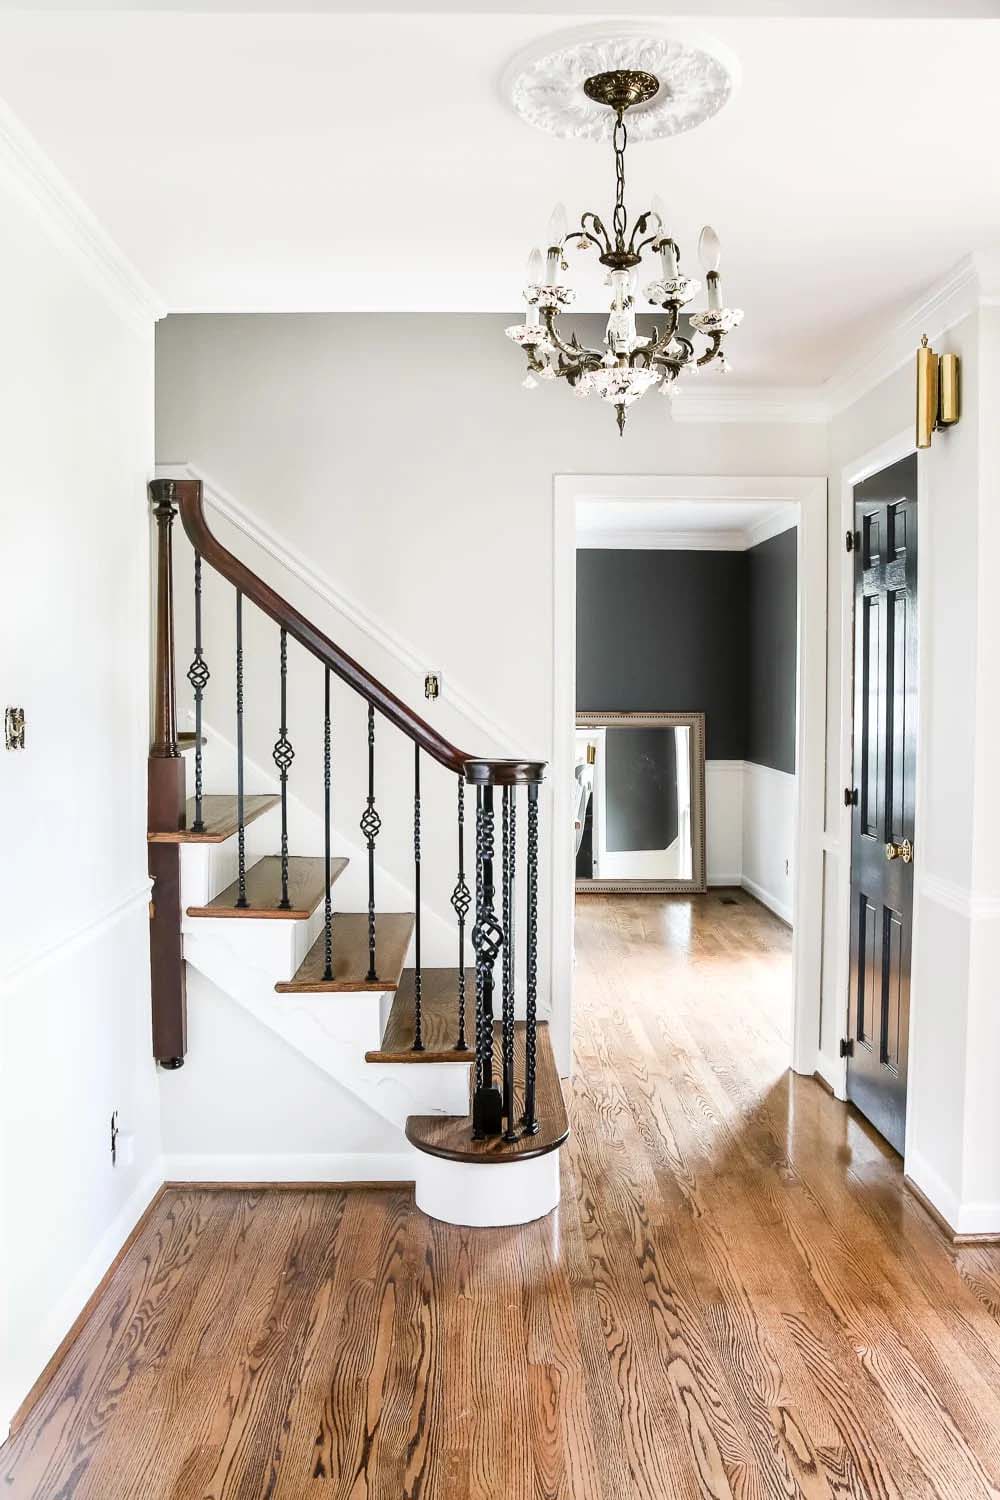 An entryway with a large chandelier, staircase, and hall painted with benjamin moore classic gray